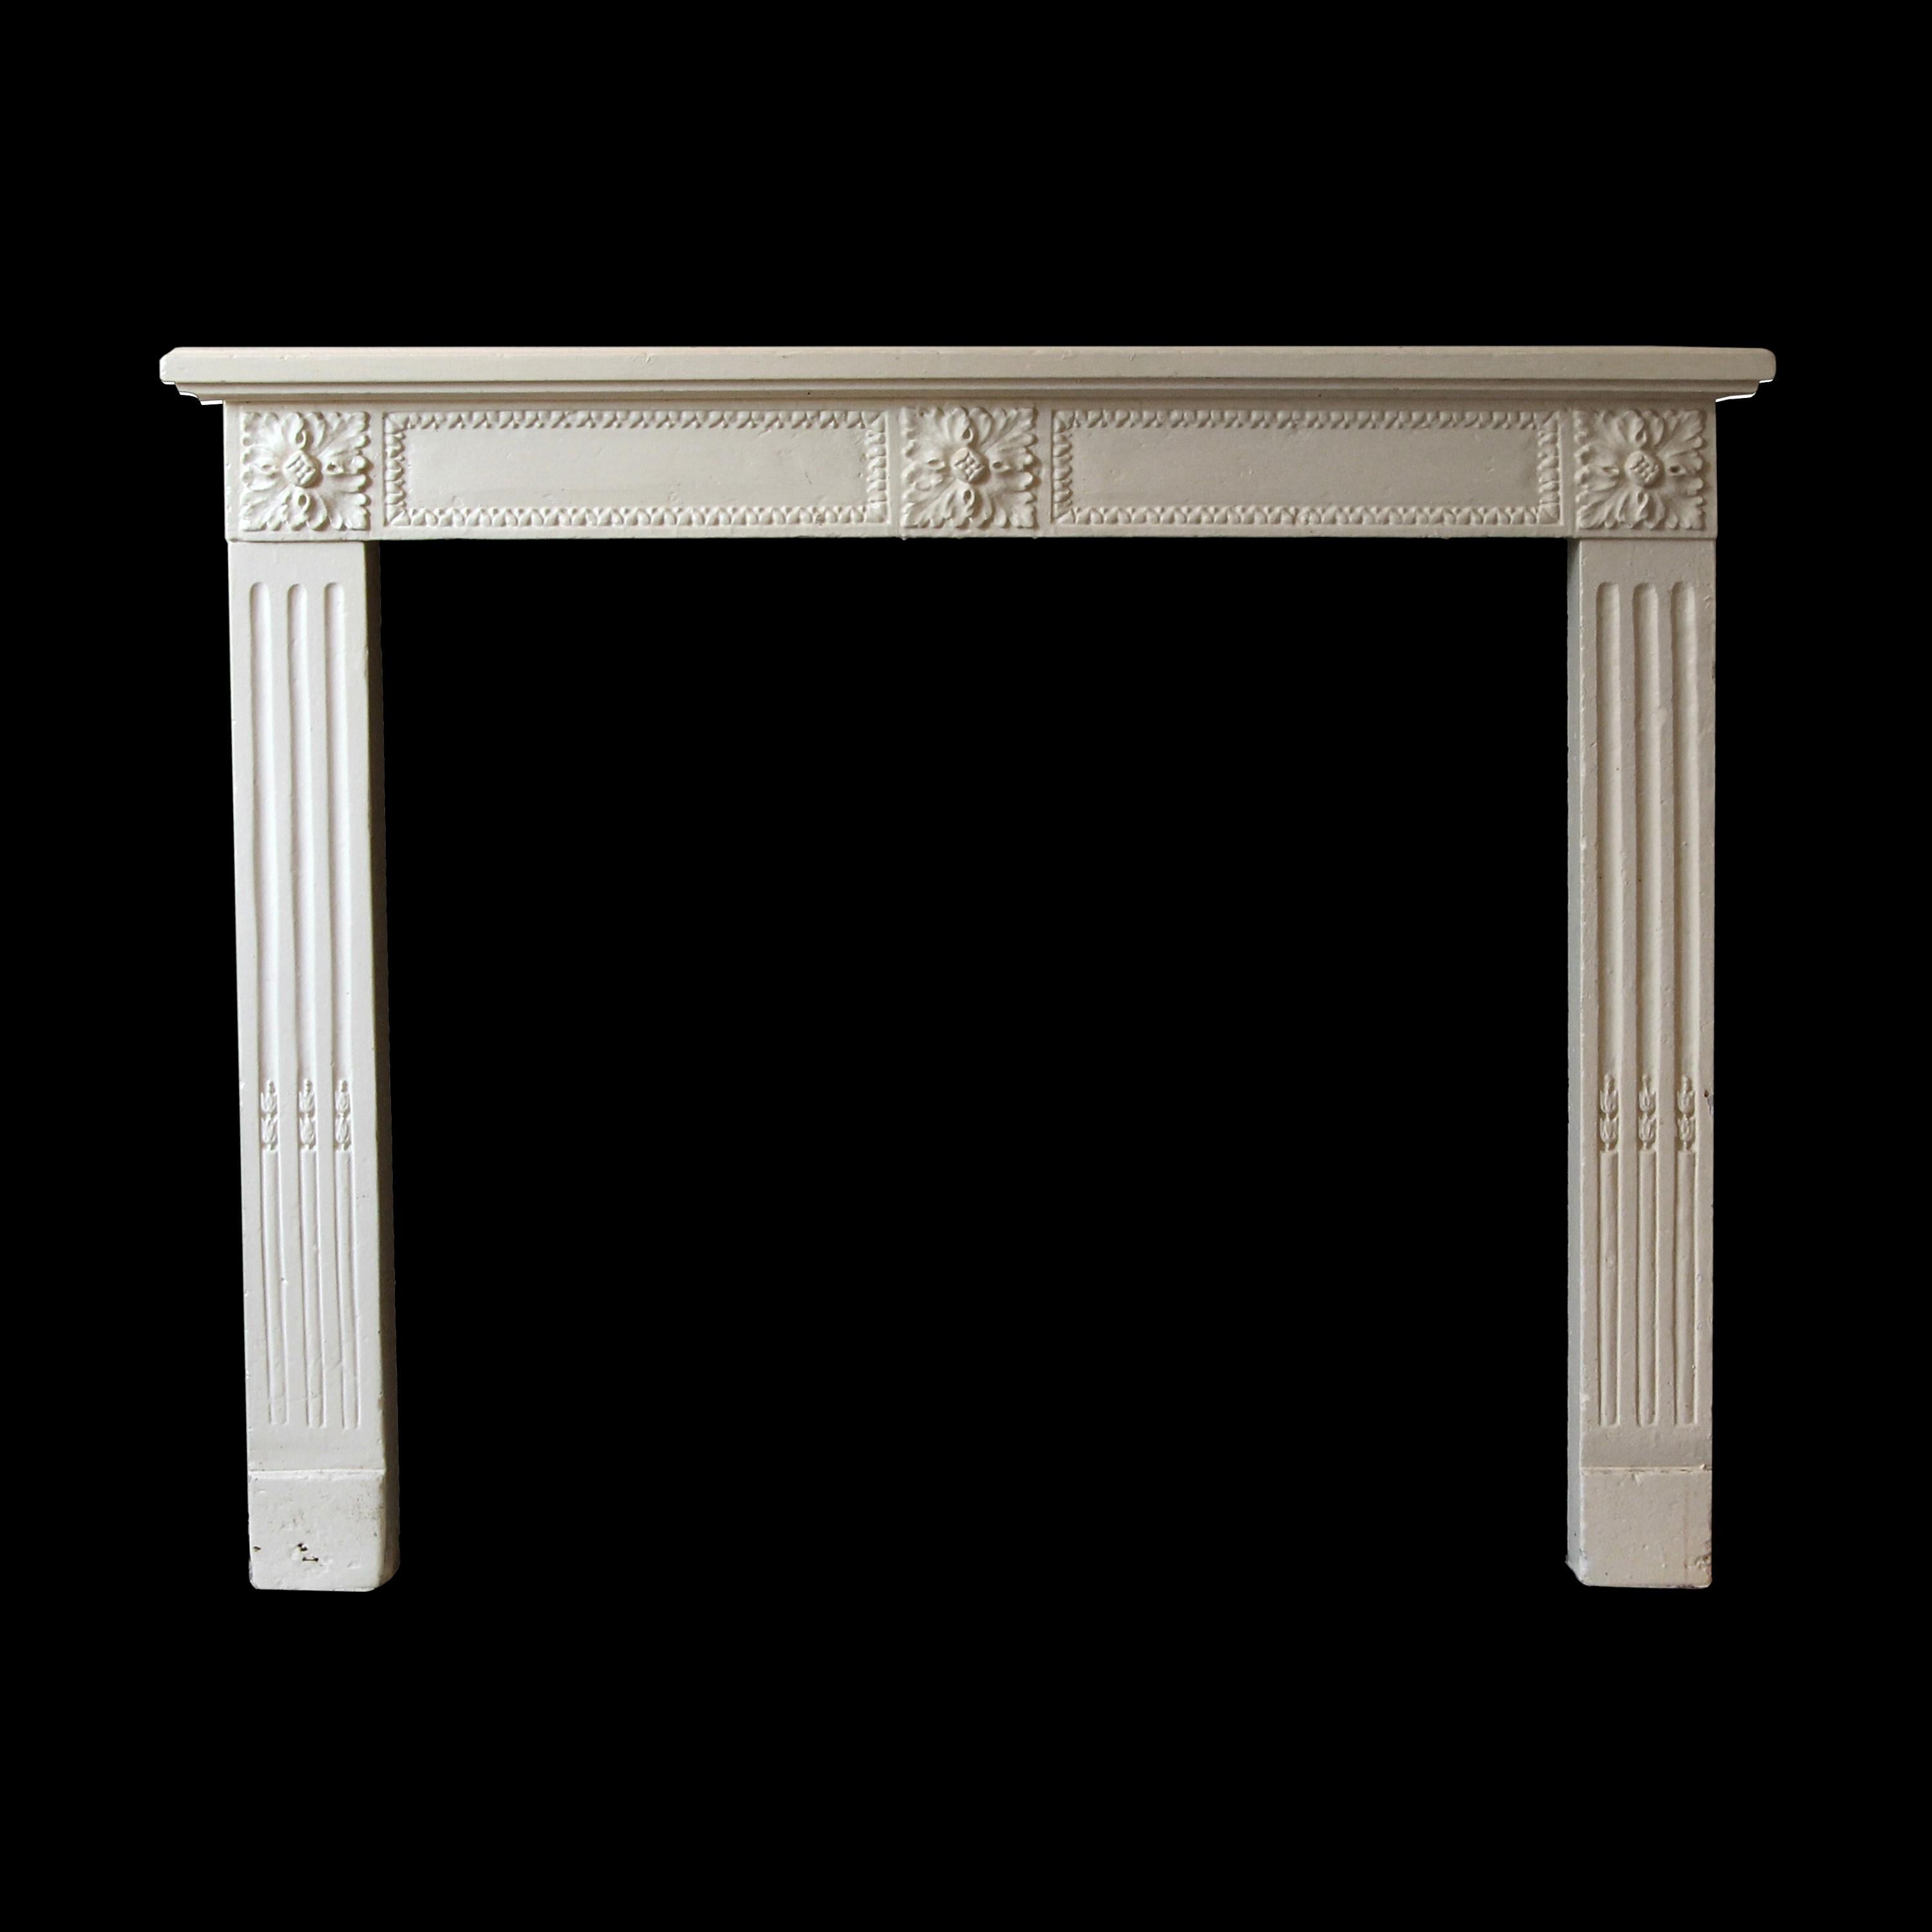 The pictured hearth is not included. Louis XVI French Regency style carved limestone mantel that has been painted a pale yellow color. This mantel has a modest design with three carved floral motifs across the apron and carved flutings on the